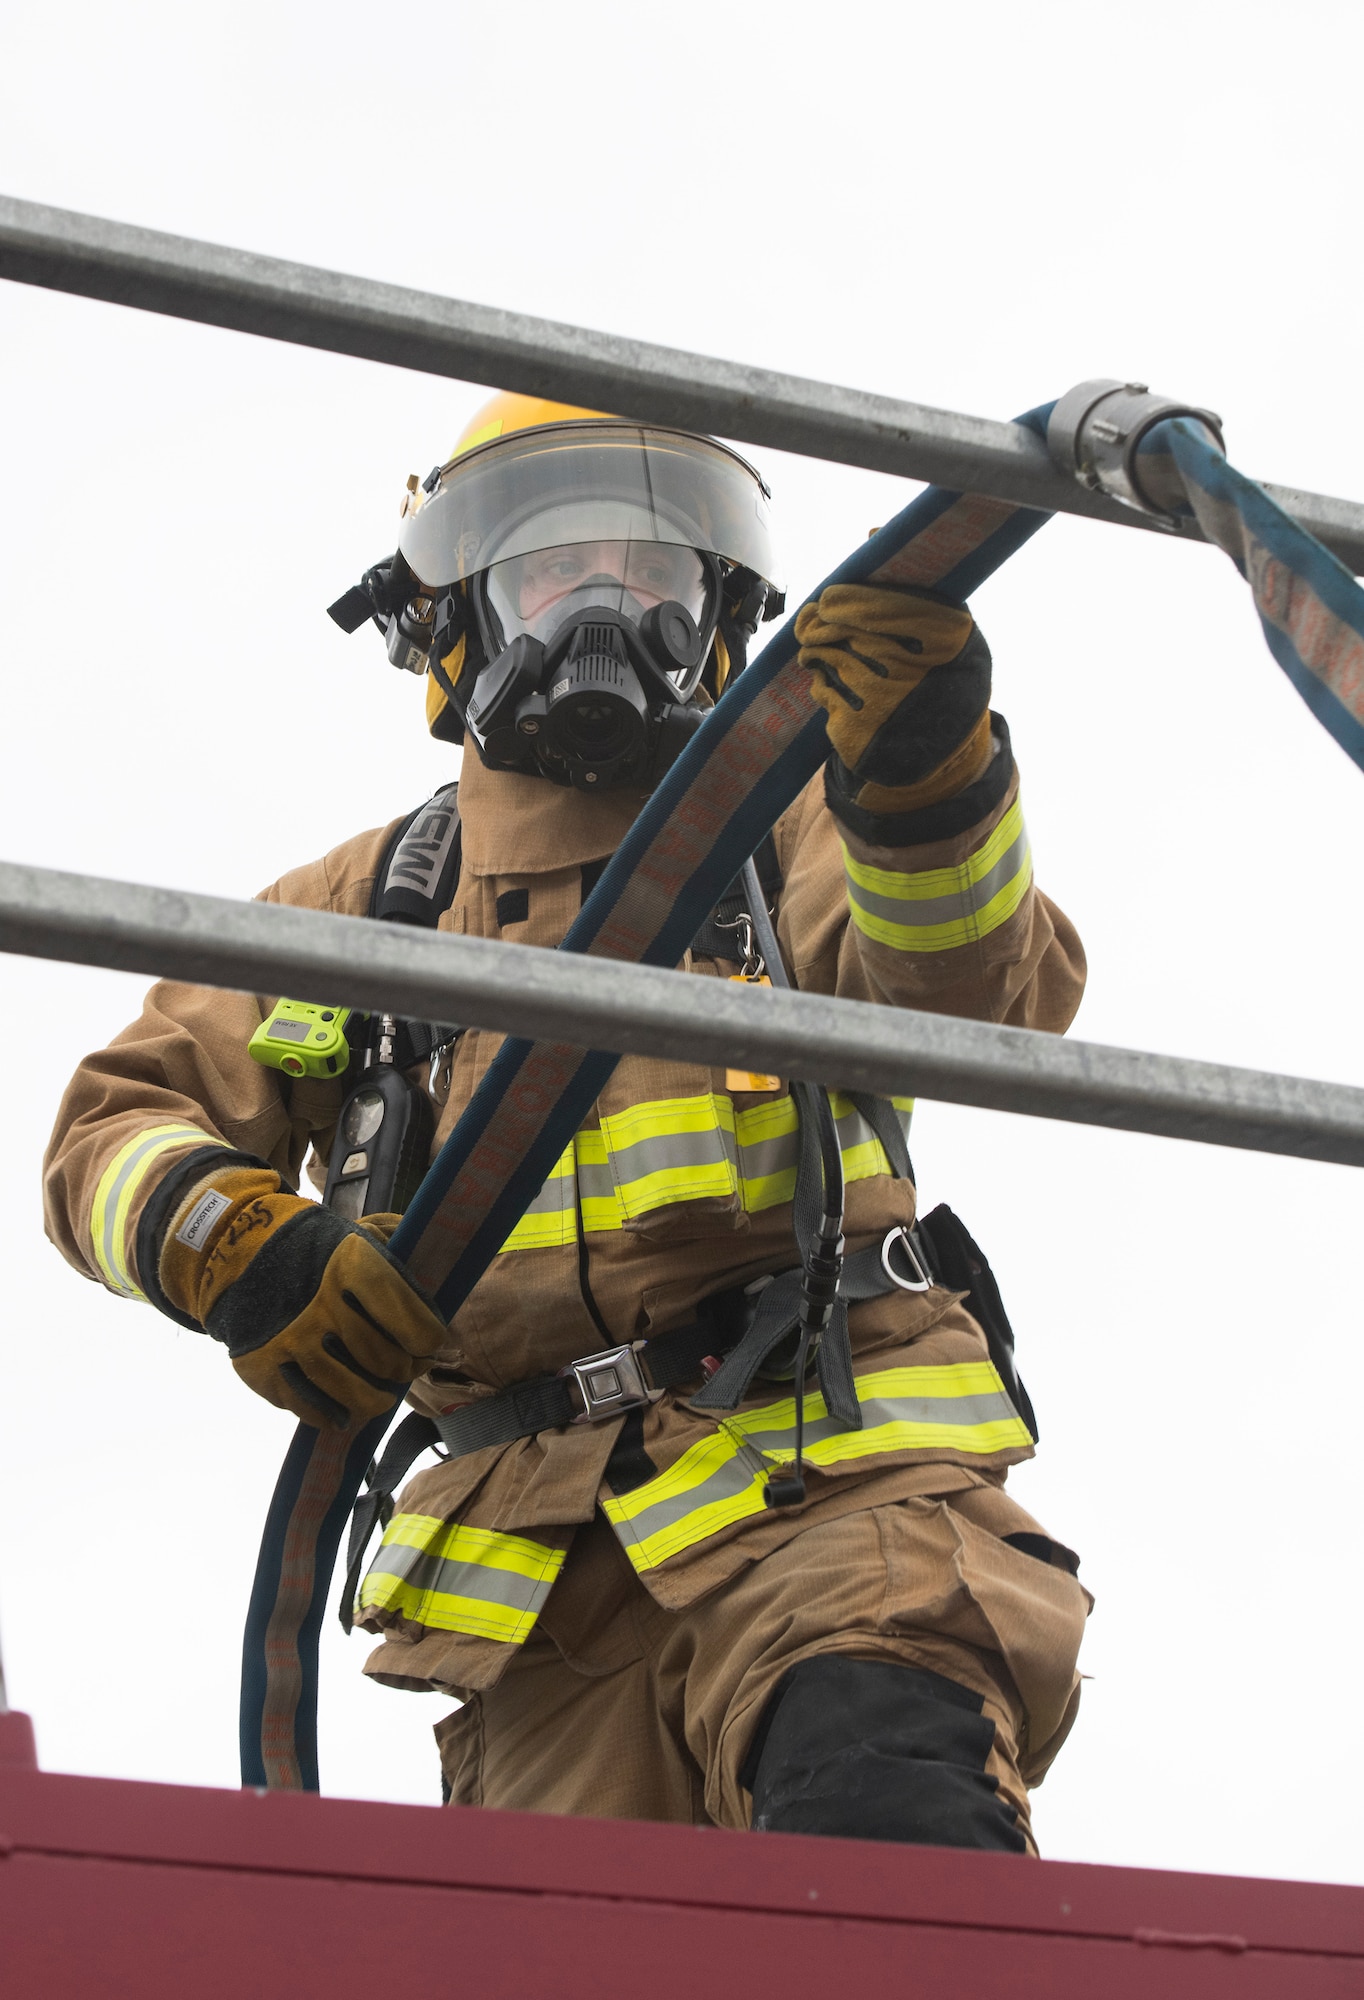 Firefighters with the 423rd Civil Engineer Squadron train on a confined spaces trainer at RAF Alconbury, England on March 30, 2020. This type of training helps the firefighters maintain readiness and stay proficient in their craft. (U.S. Air Force photo by Master Sgt. Brian Kimball)